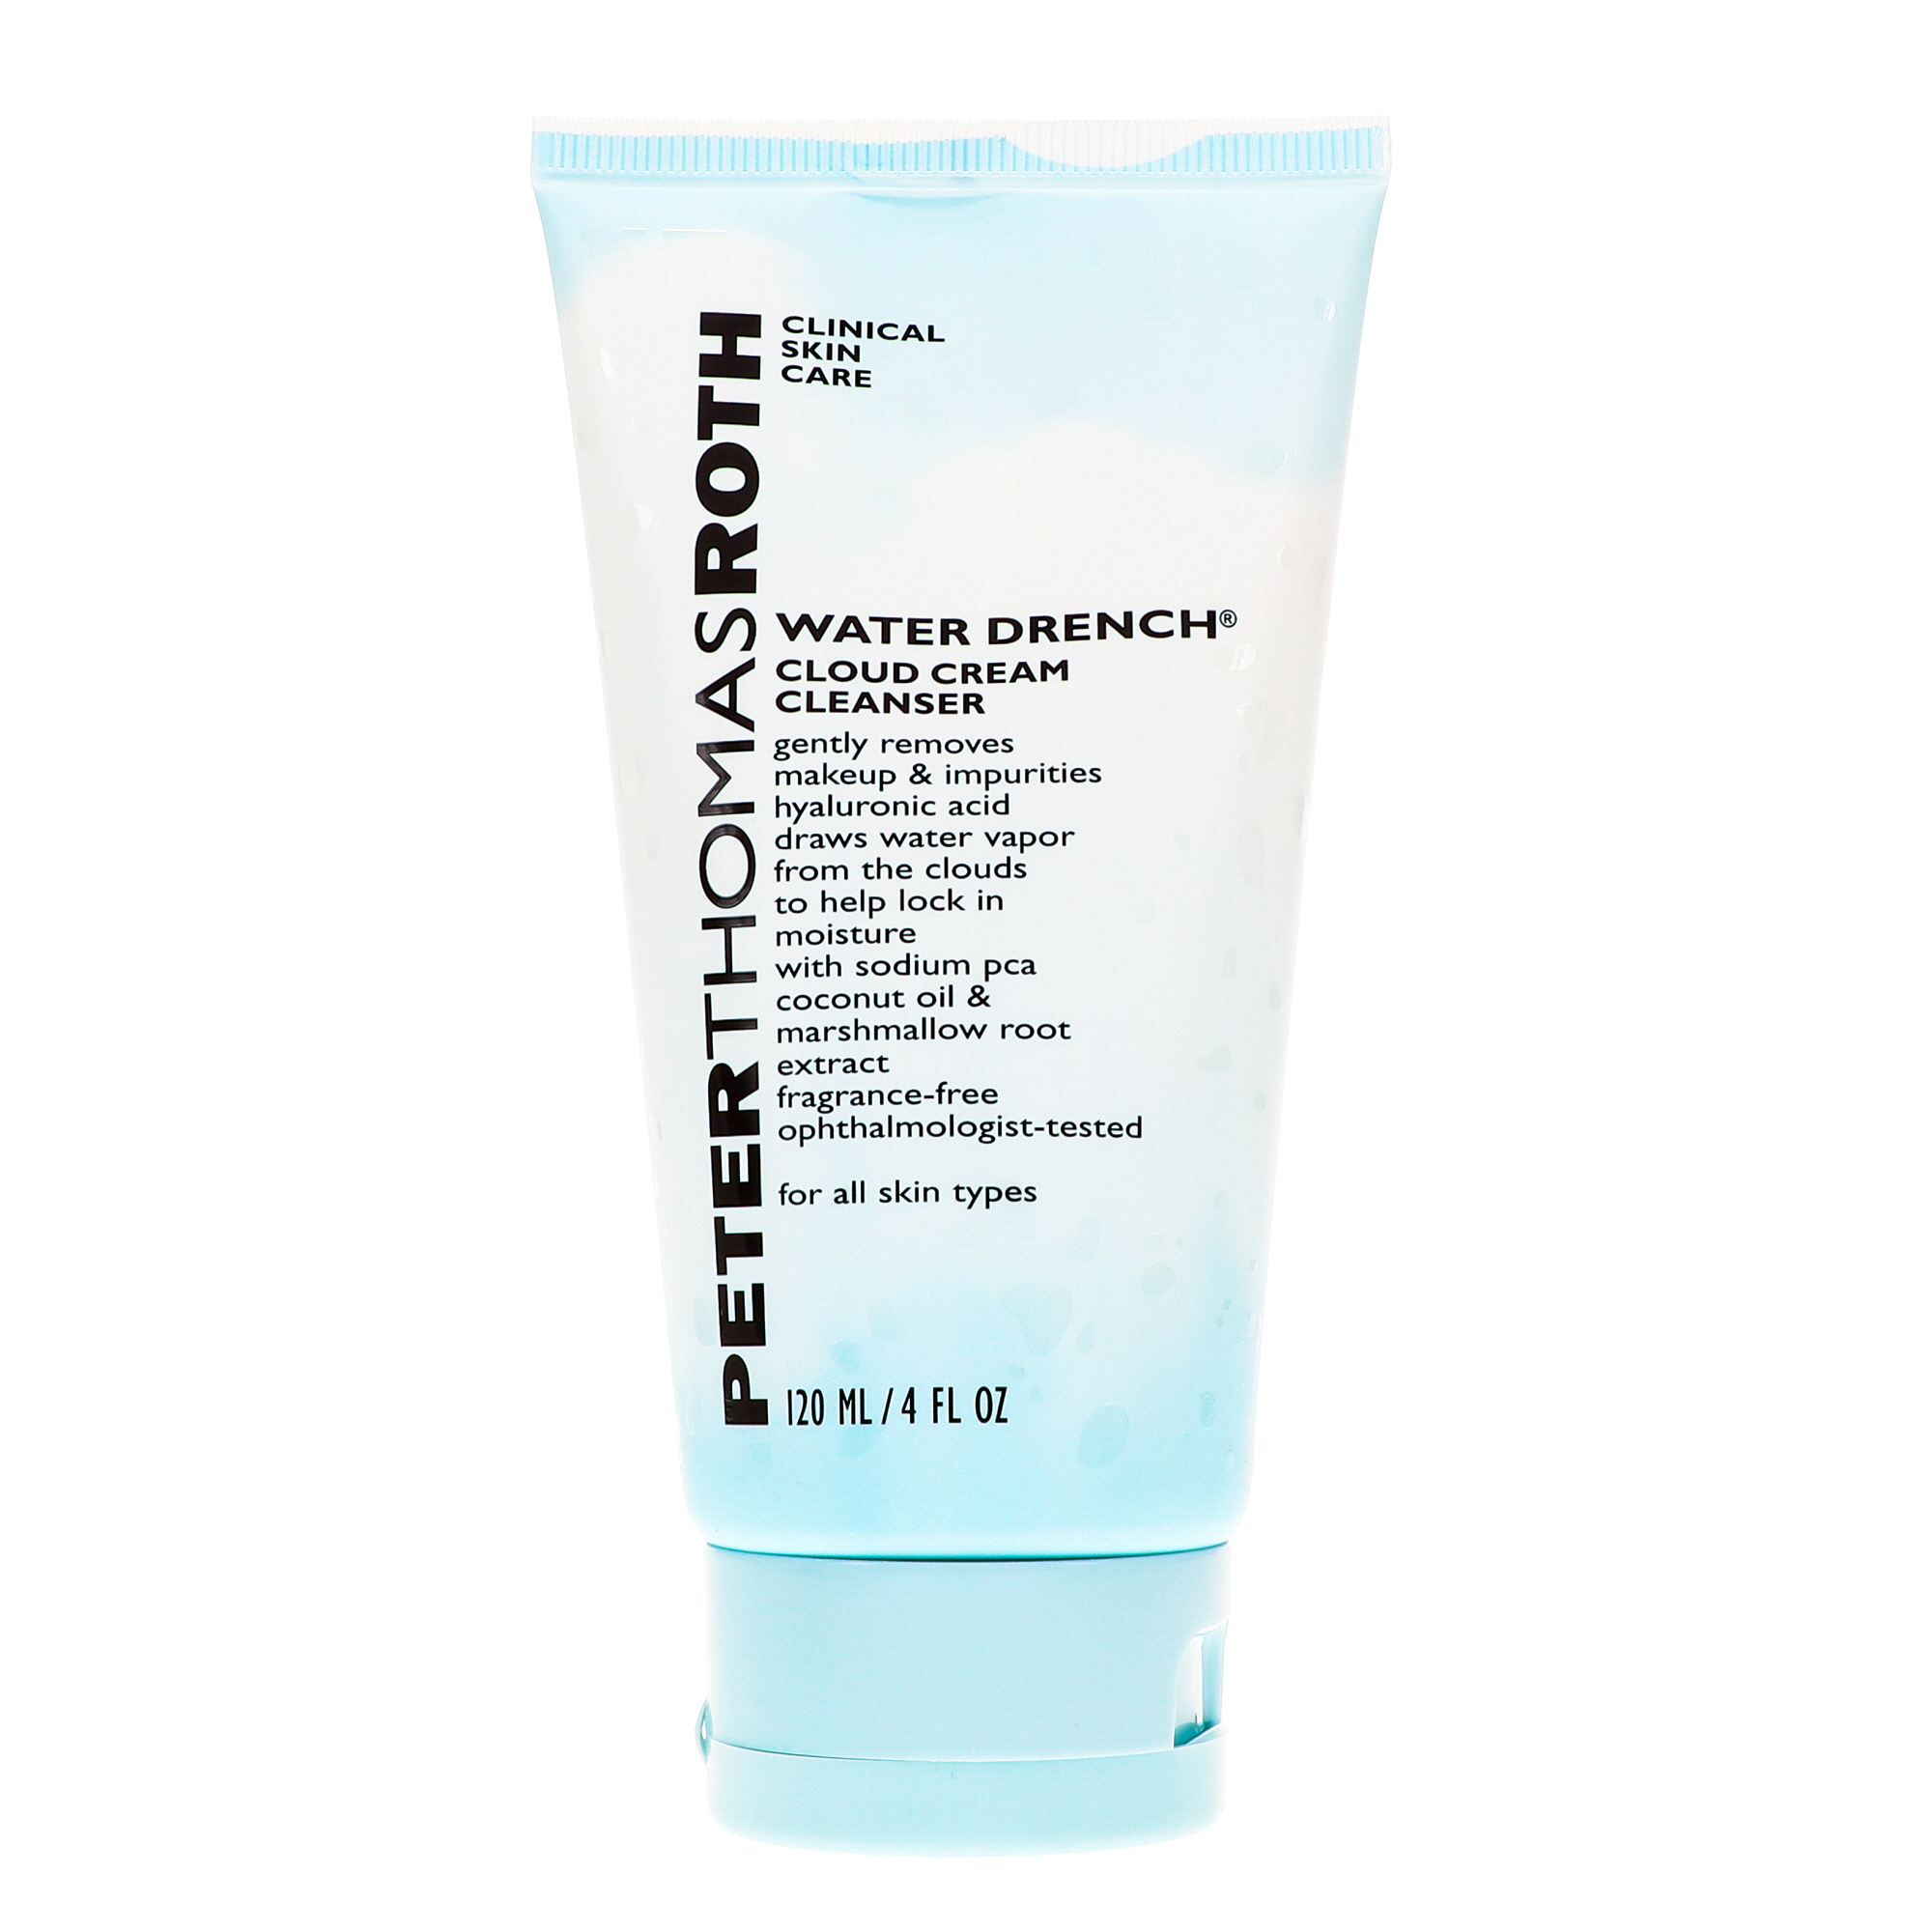 Peter Thomas Roth Water Drench Cleanser 4 oz - image 4 of 7